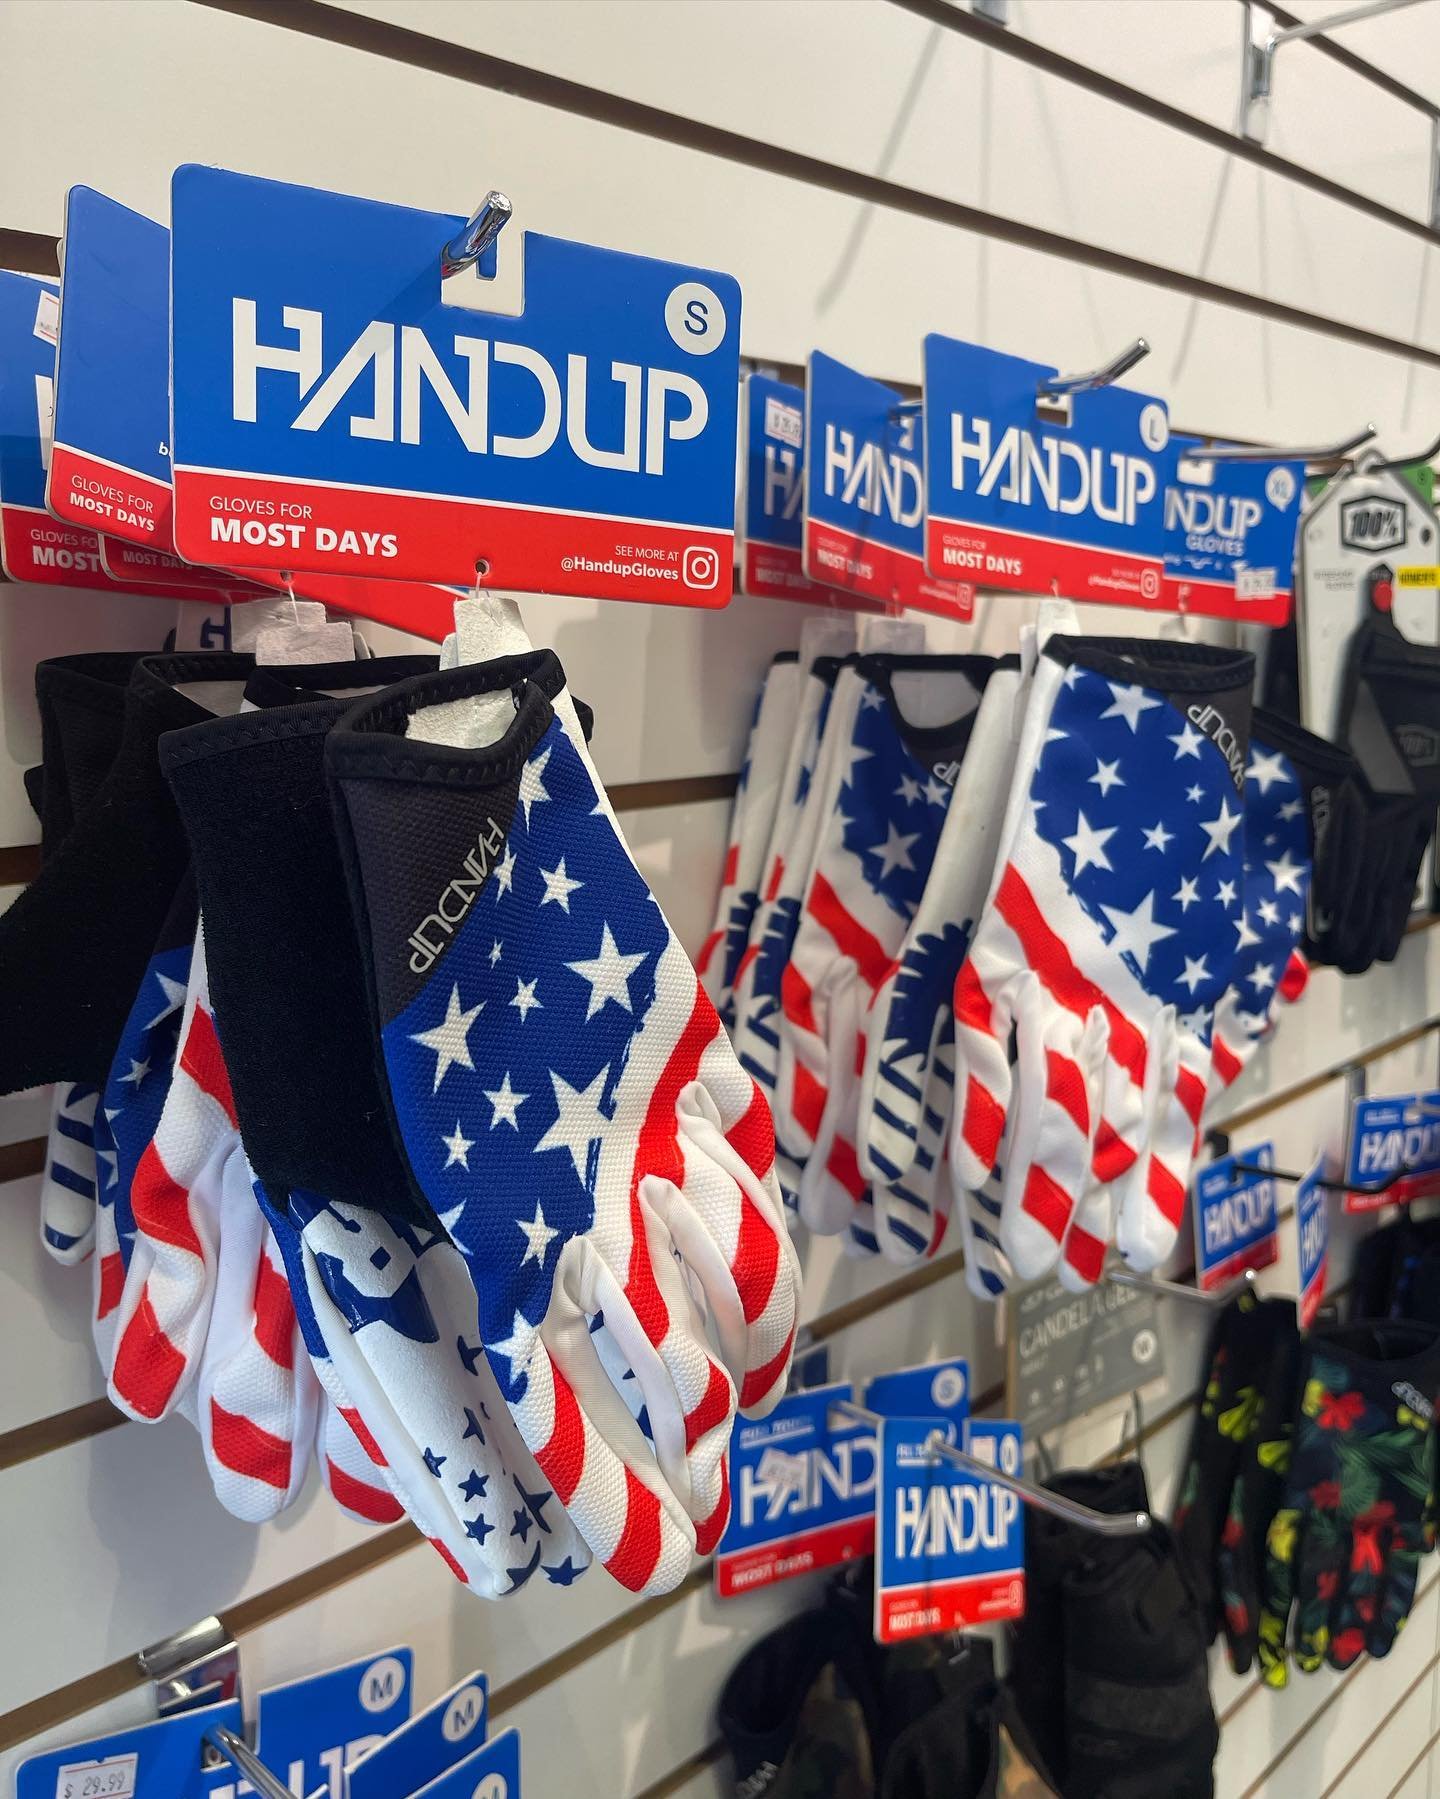 Fresh season, fresh kit&hellip; right? At least lend yourself a hand with some new gloves and grips from @handupgloves @odigrips @dmrbikesofficial @deitycomponents 
#shoplocal #mtb #parkcity #visitparkcity #parkcitymtb #parkcitymountainresort #handup